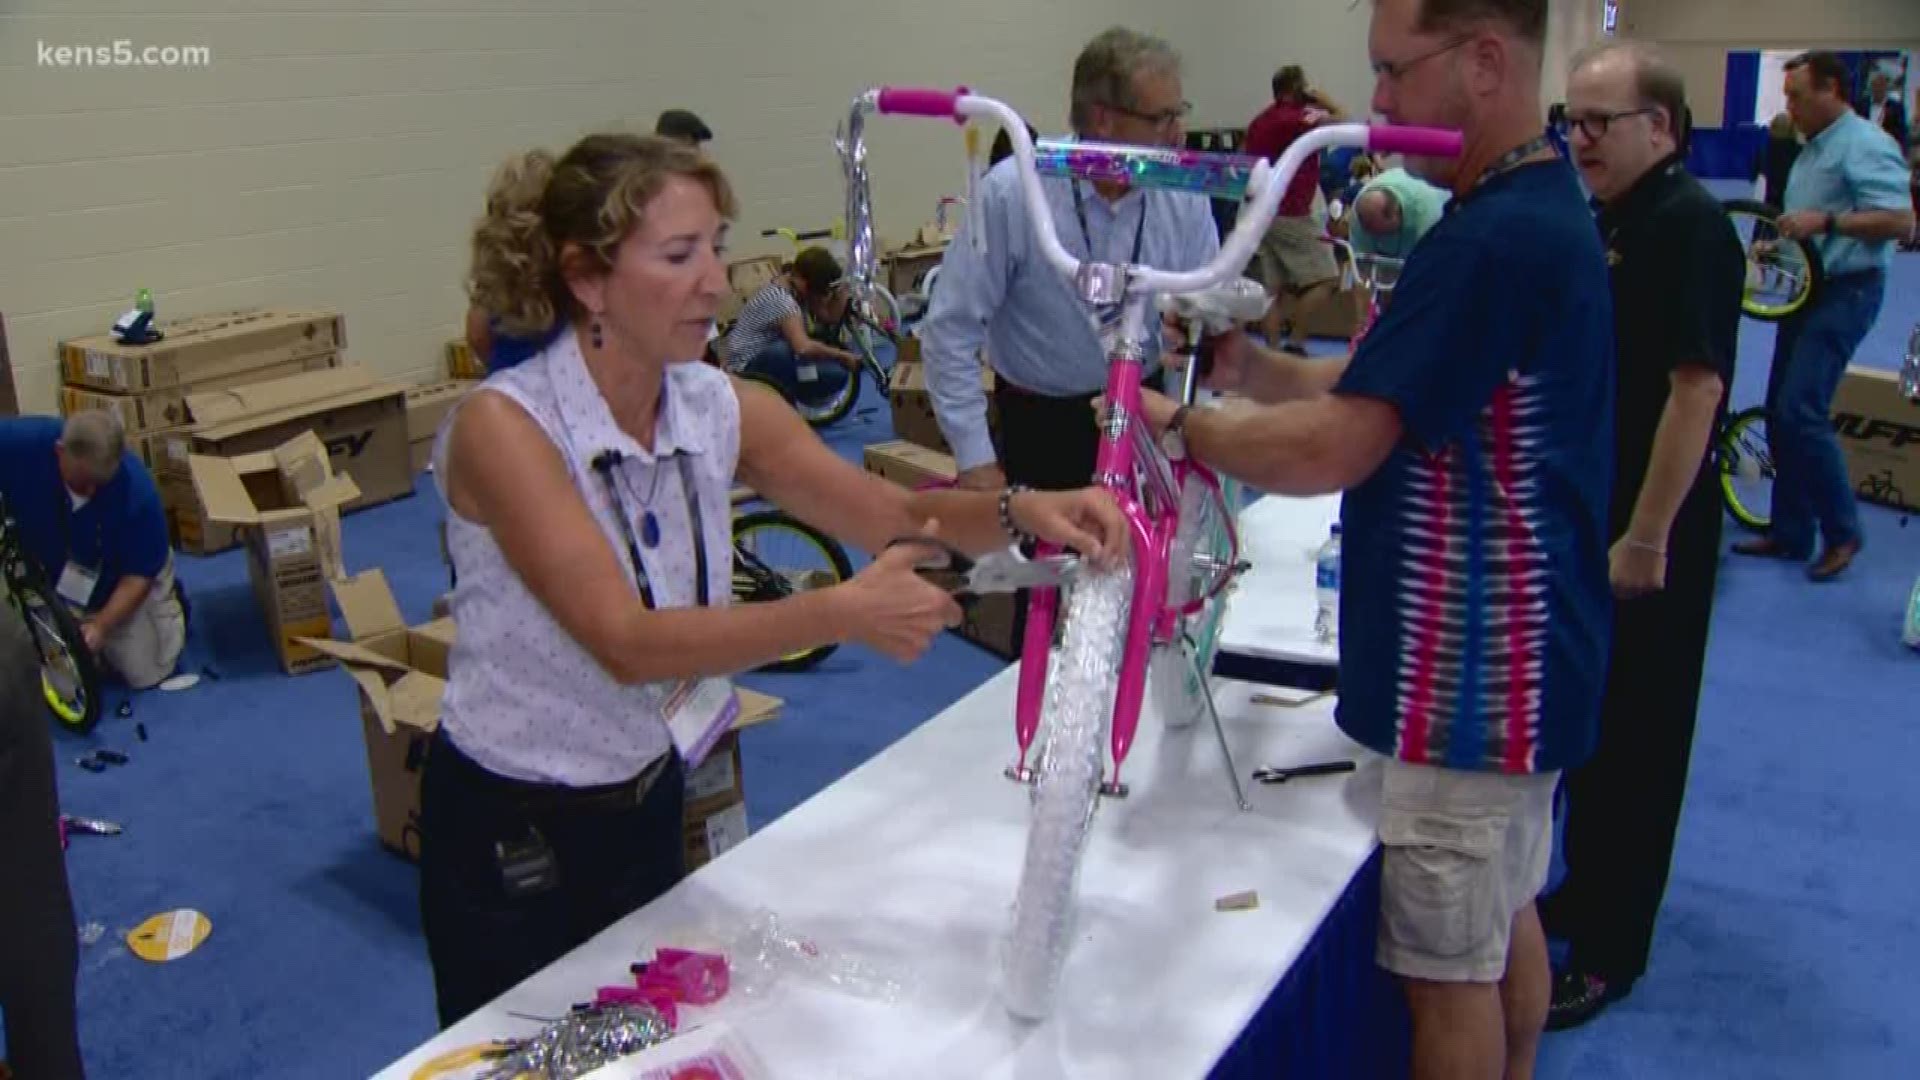 A group of volunteers came together this week to help underprivileged kids feel special, building bikes and collecting special gifts to donate to children.